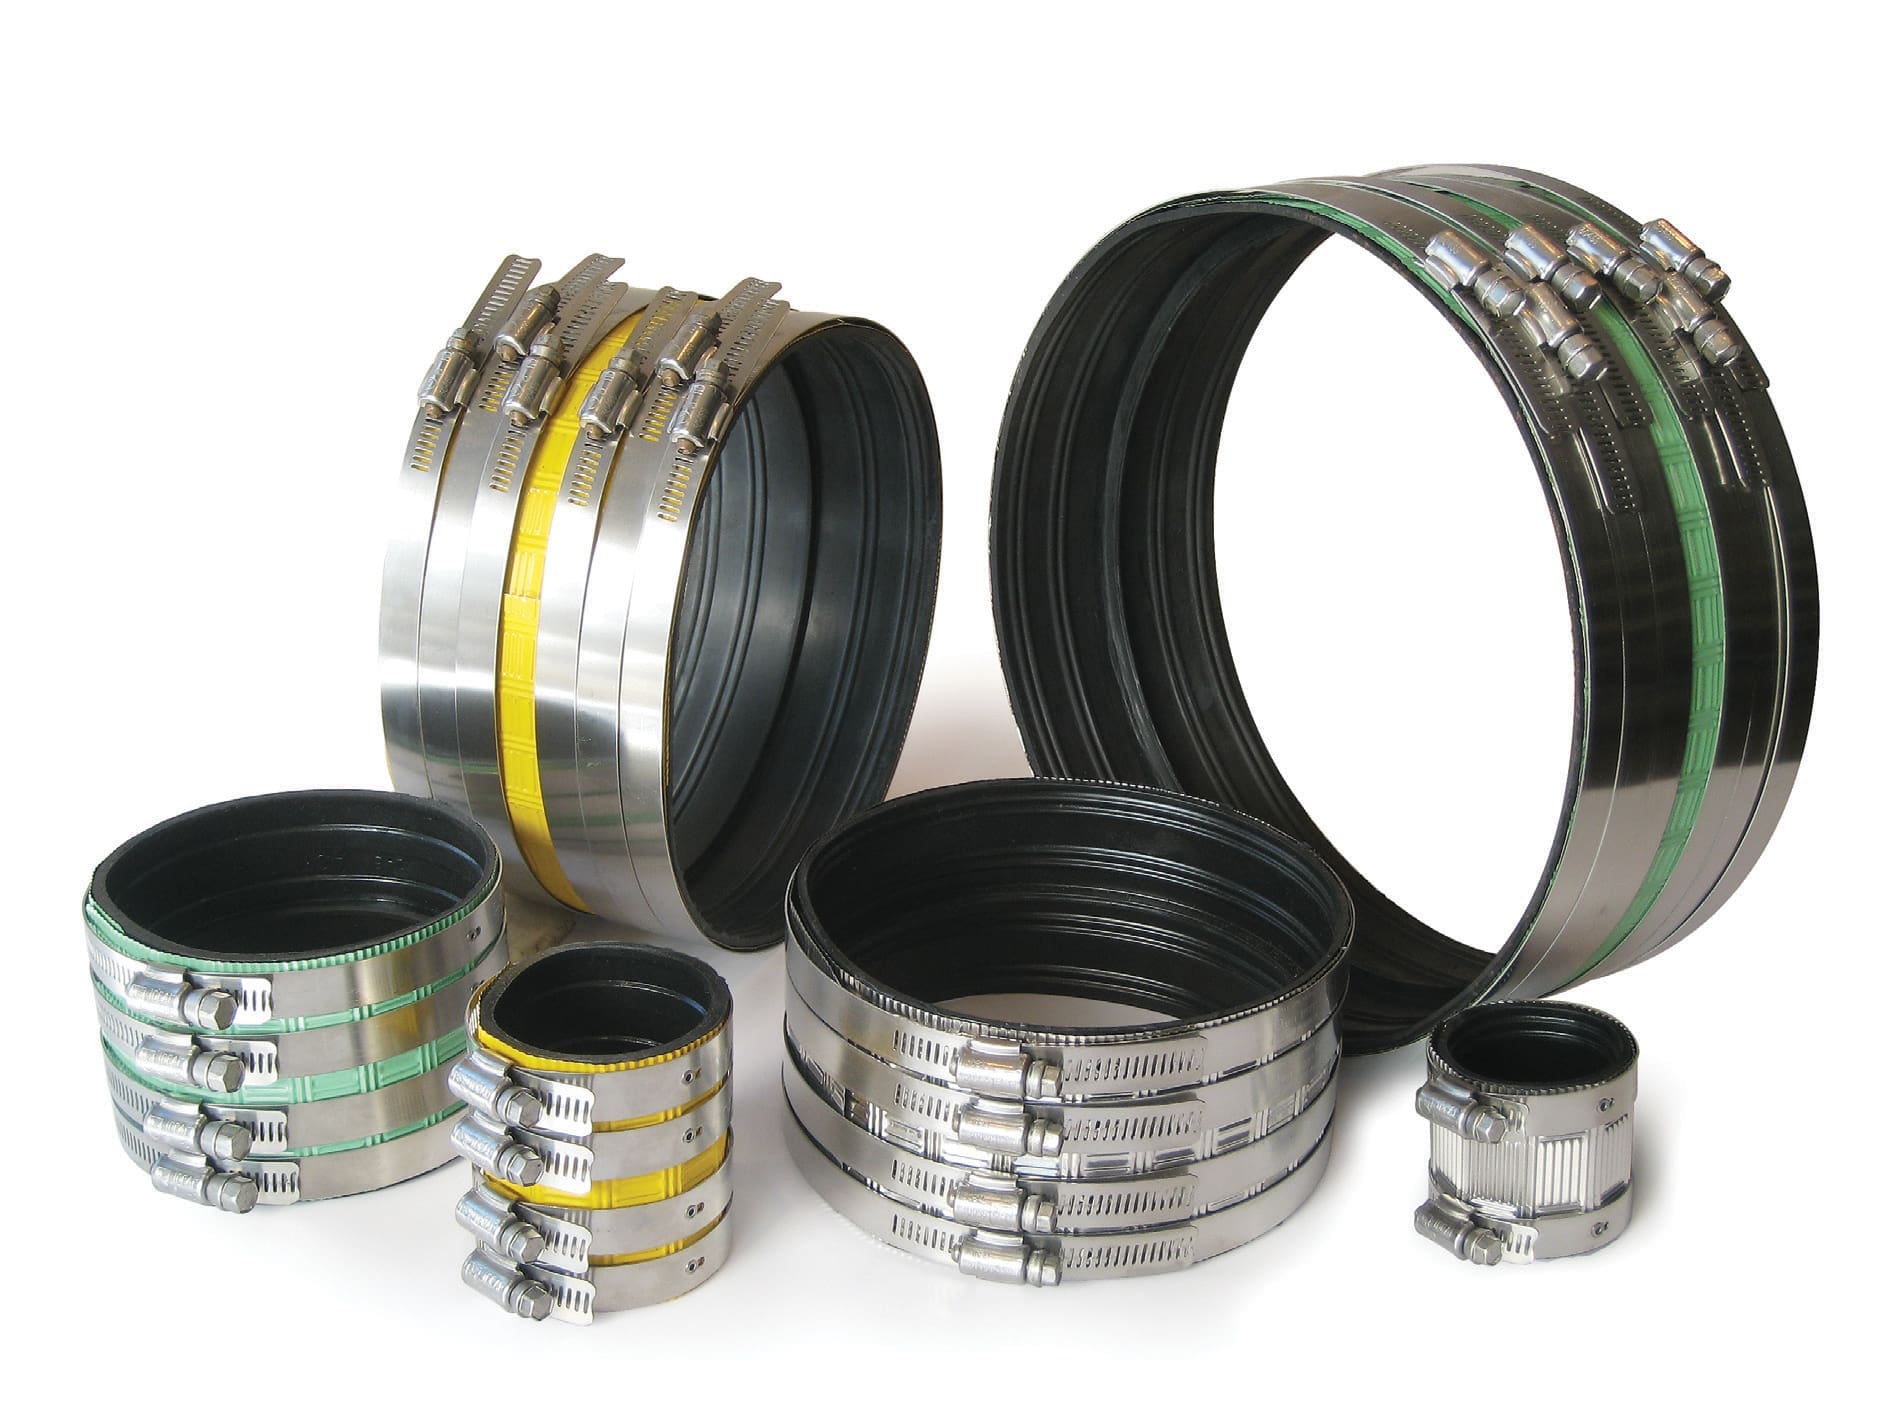 A collection of Fernco no-hub shielded couplings, used for plumbing.